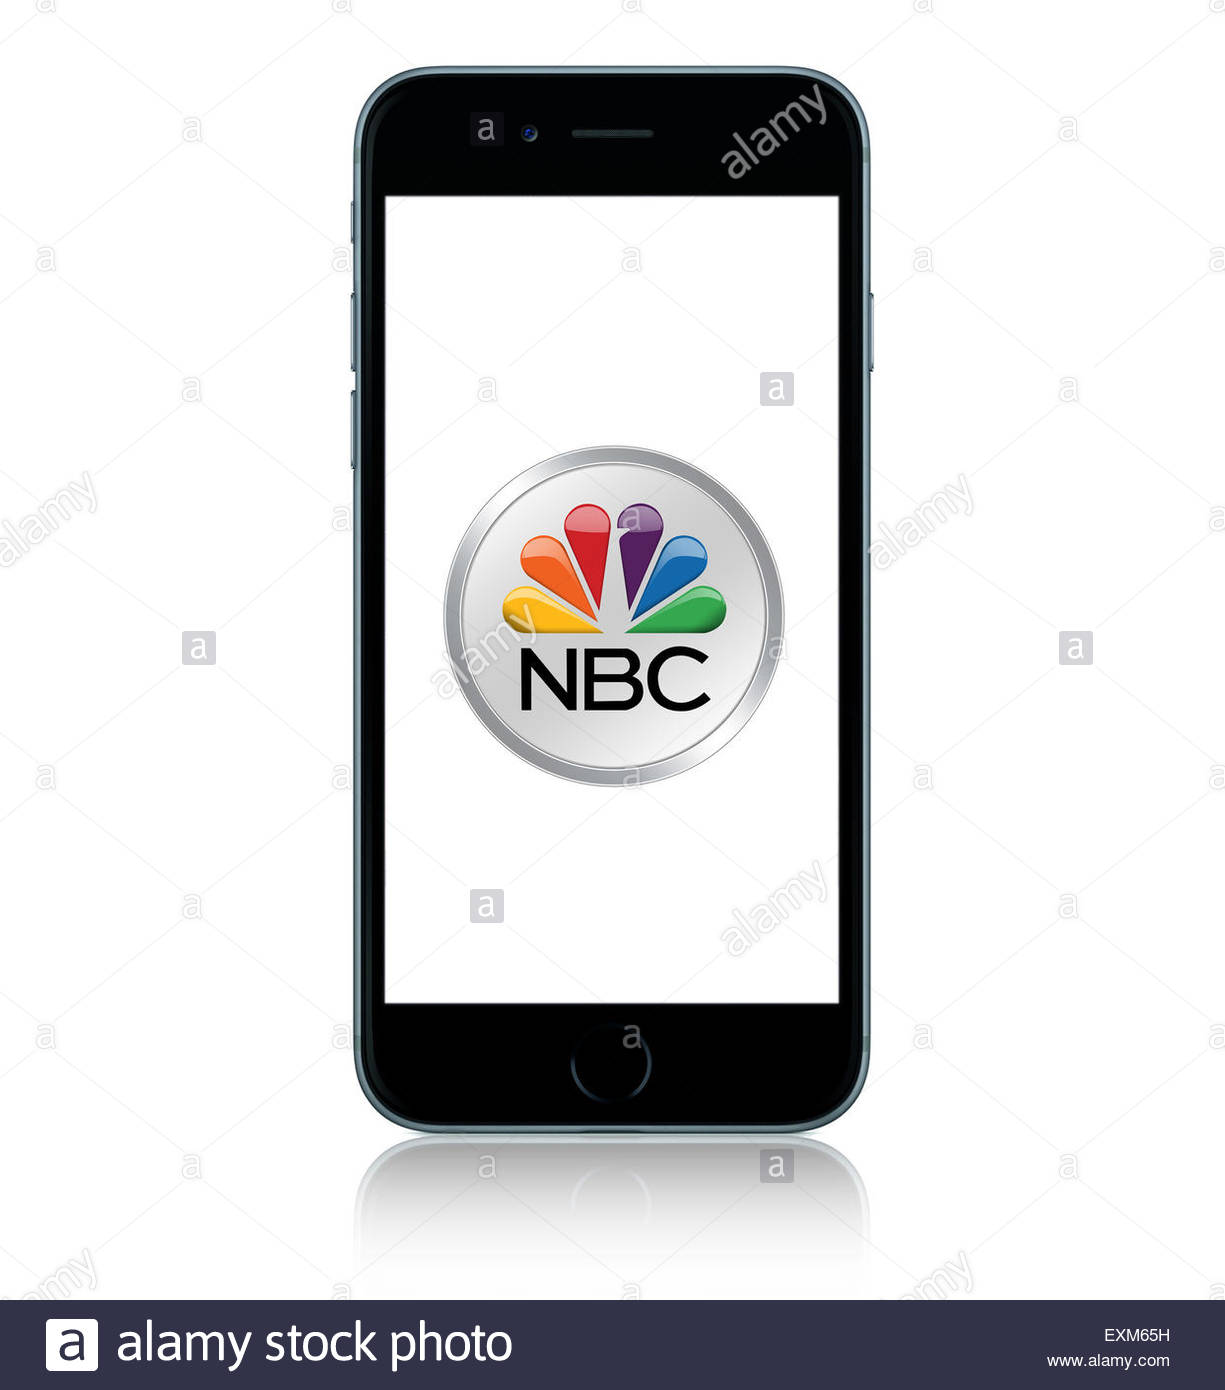 what is a credit on nbc app